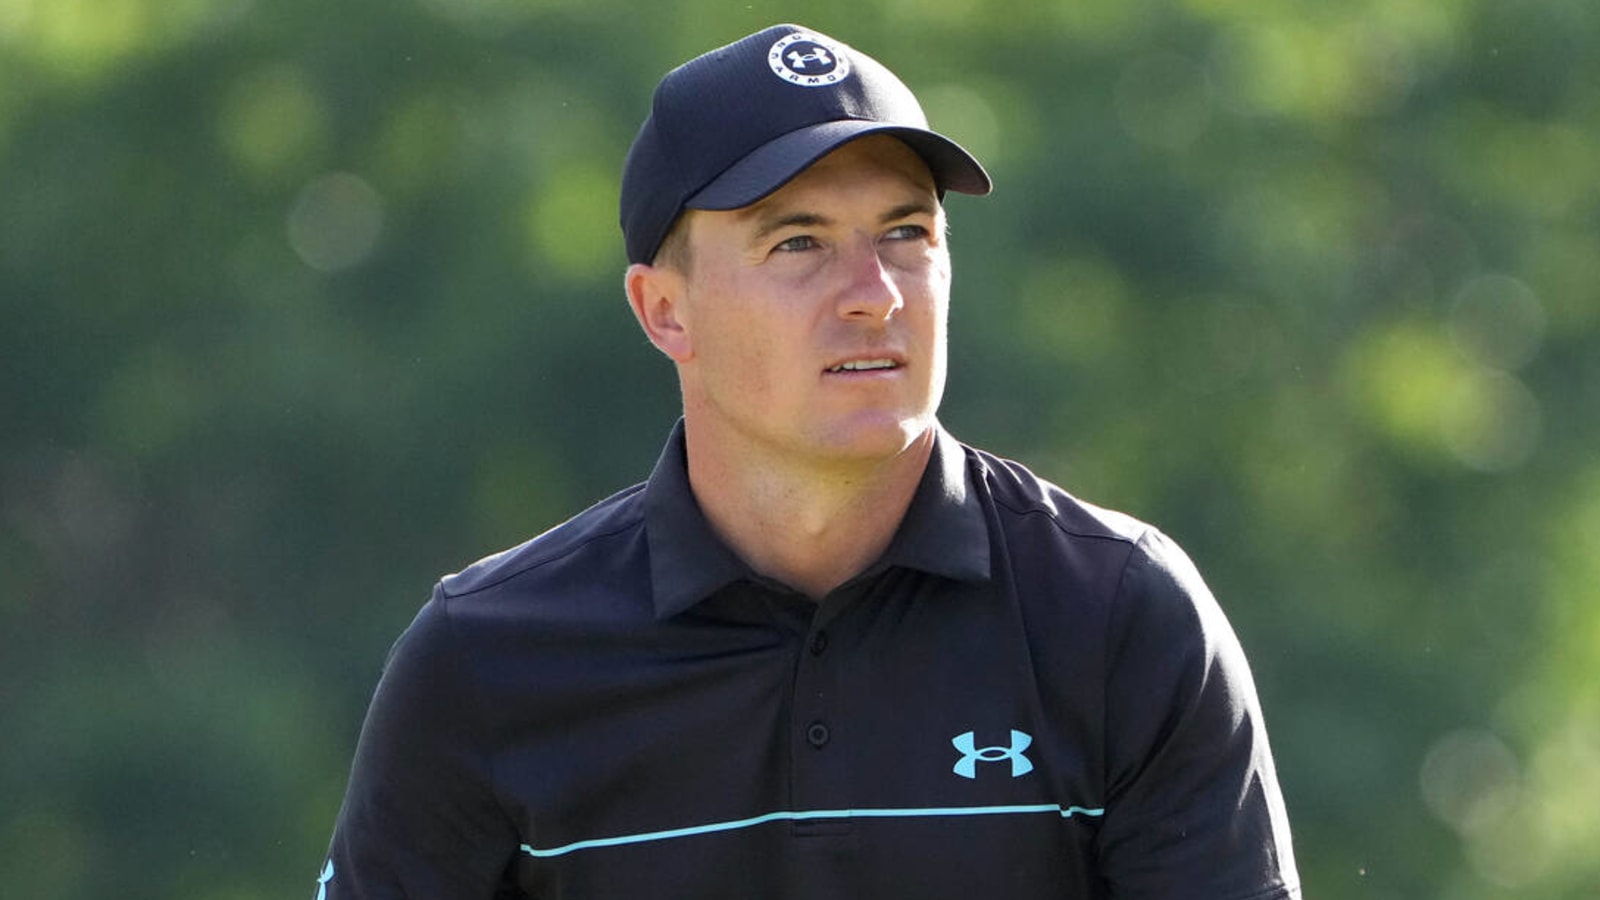 Jordan Spieth joined by roaming goats during practice round